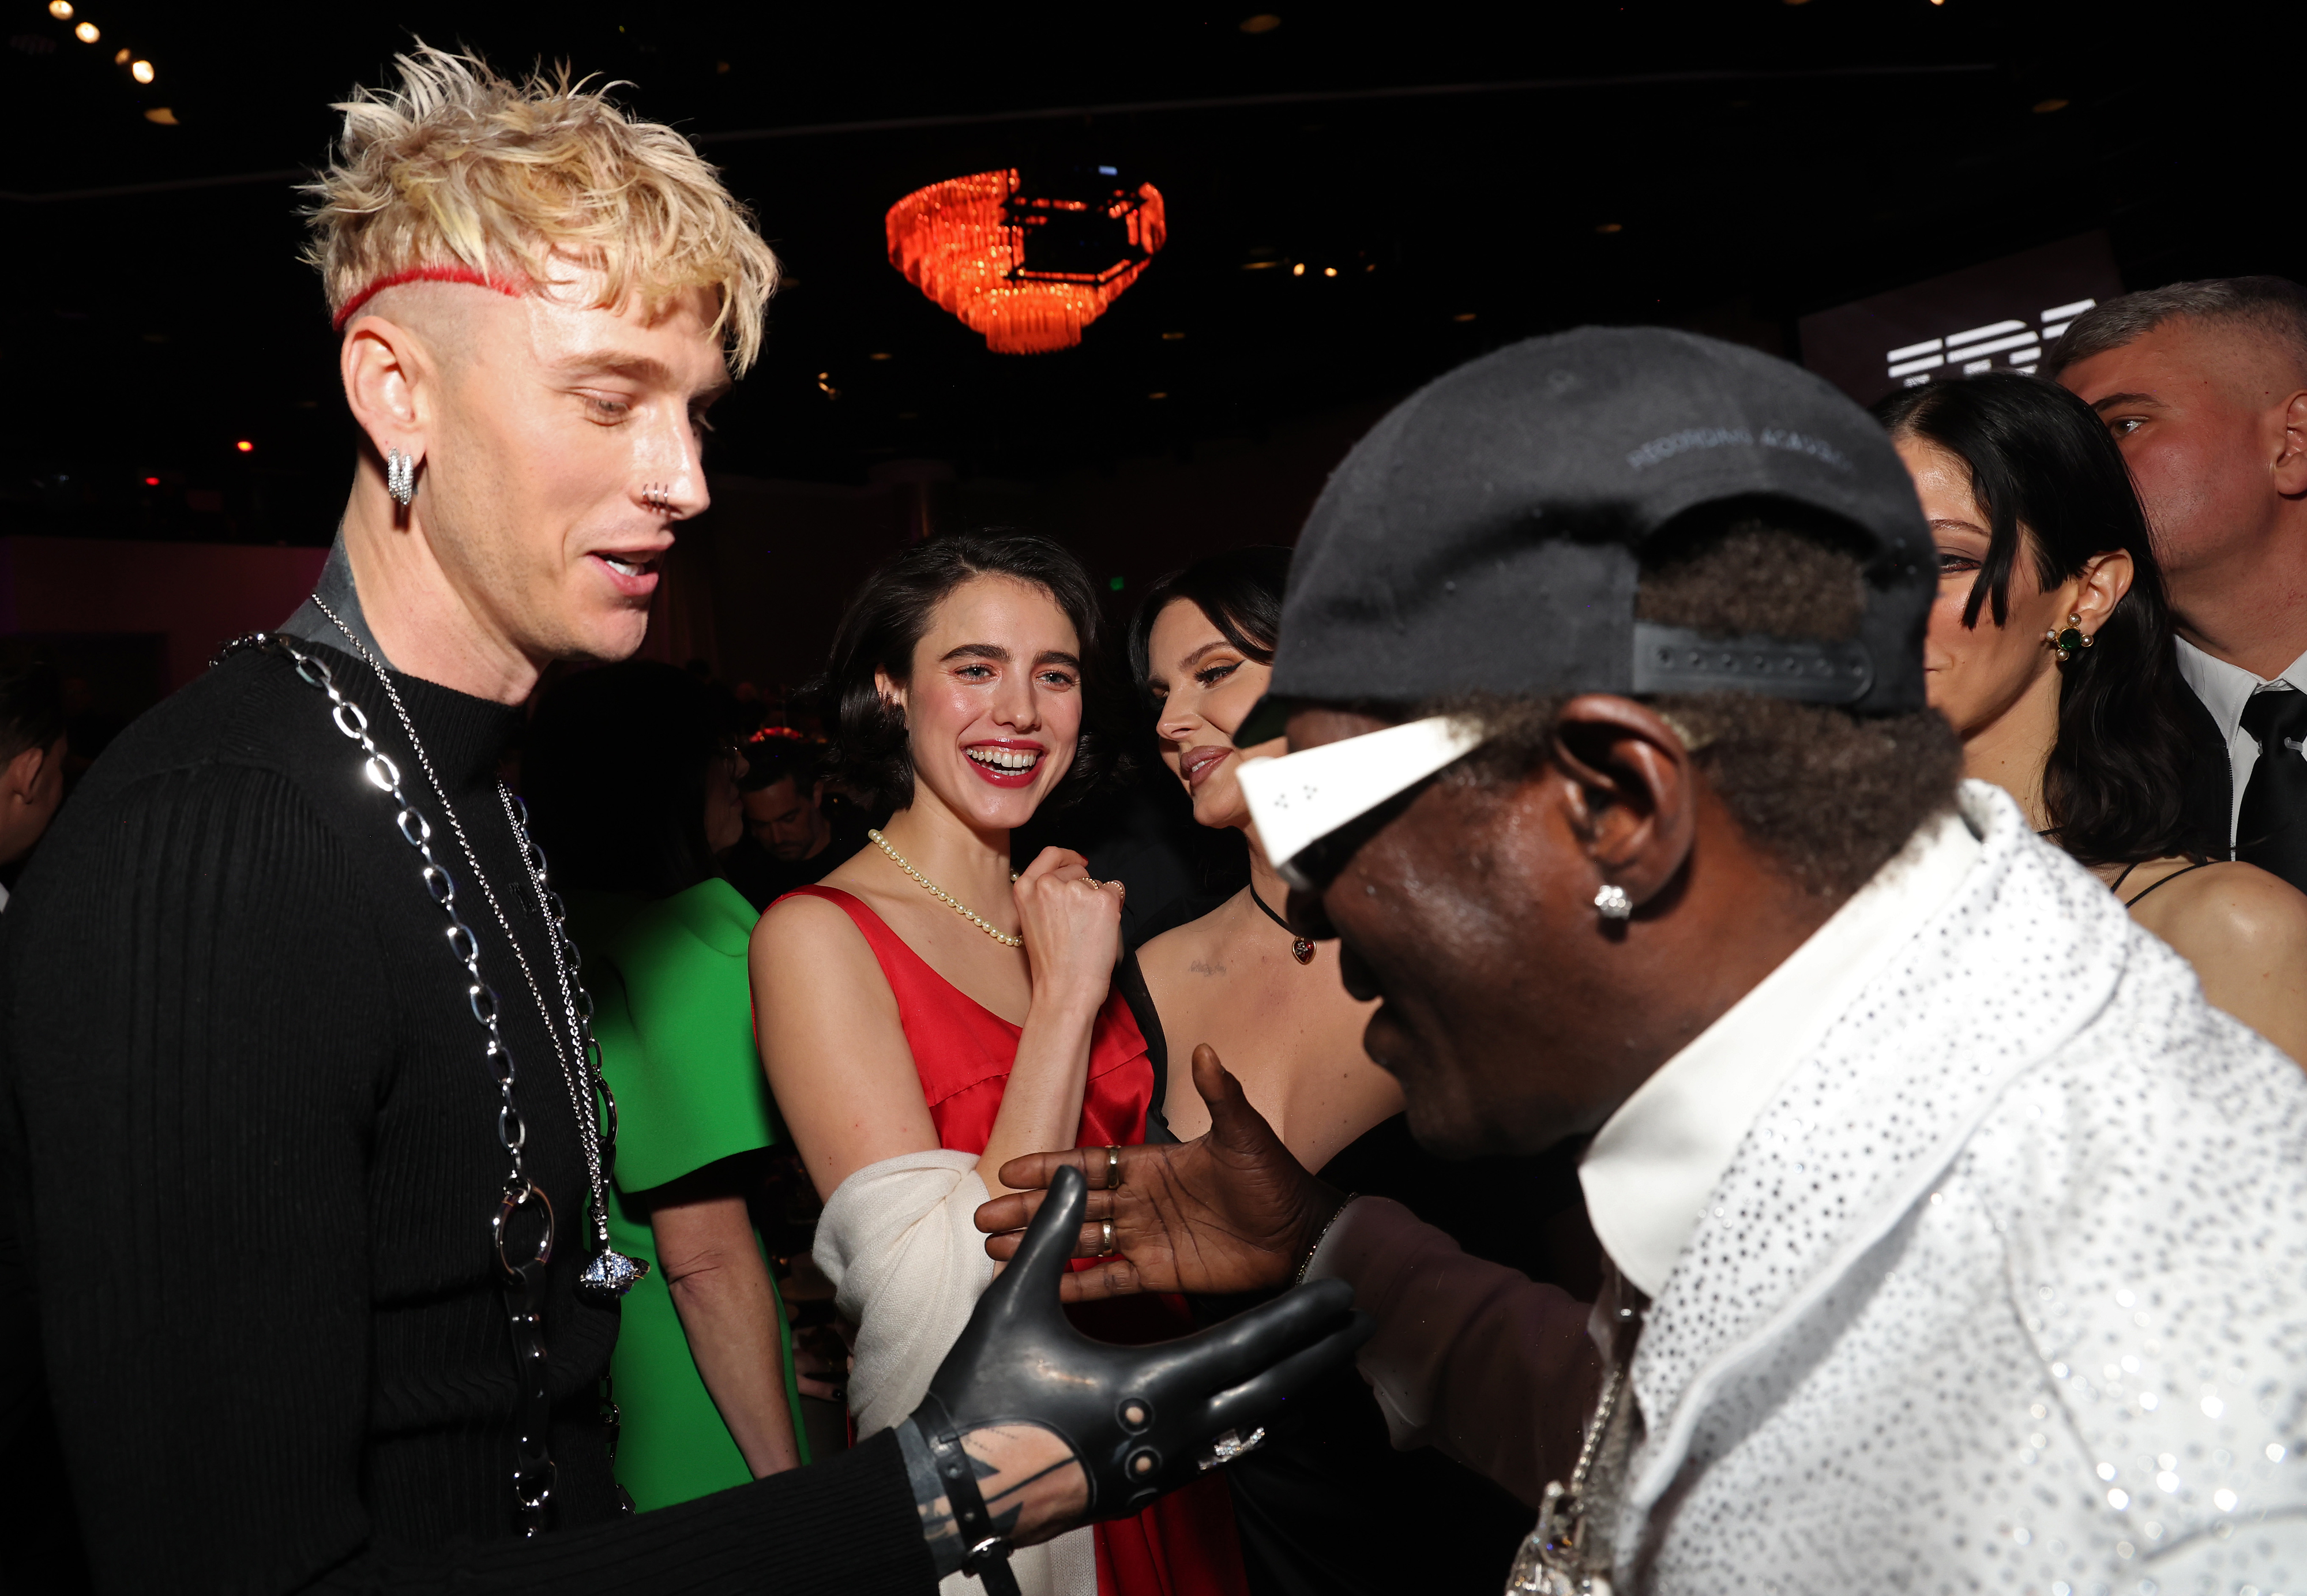 Machine Gun Kelly in a punk-inspired outfit talking with Bobby Brown, who&#x27;s wearing a sparkling jacket, at an event. Others present